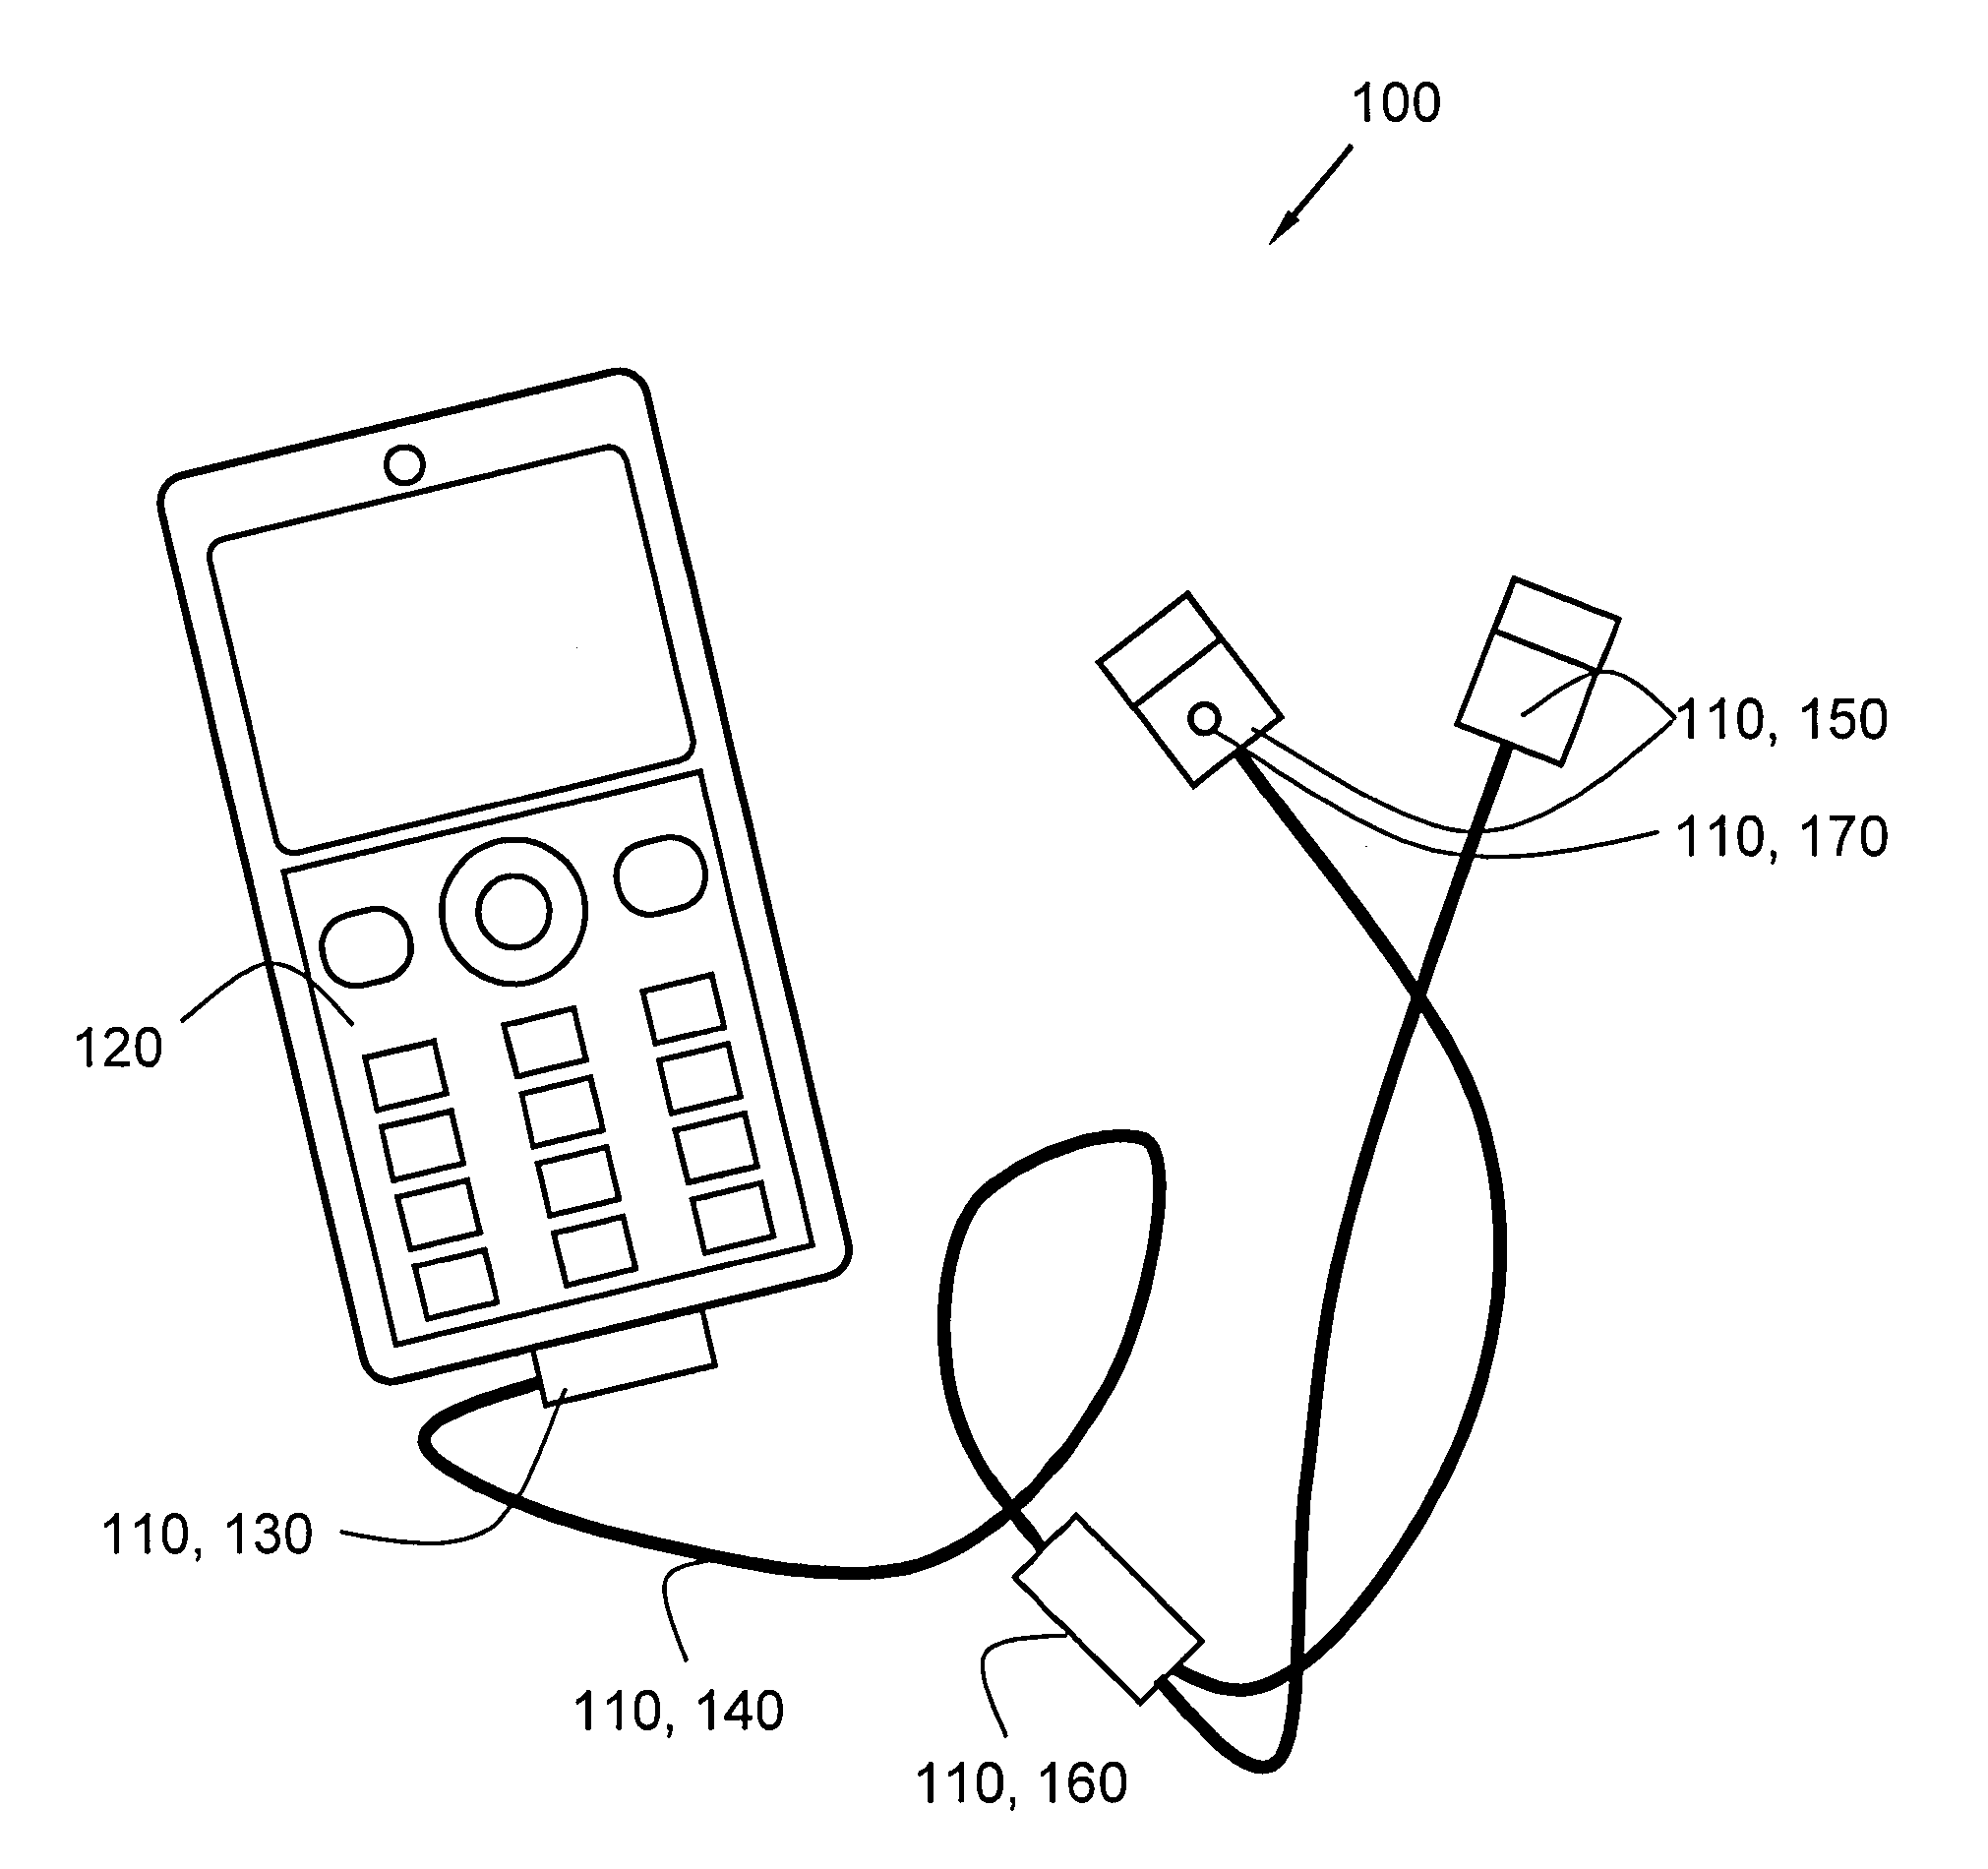 Device and method